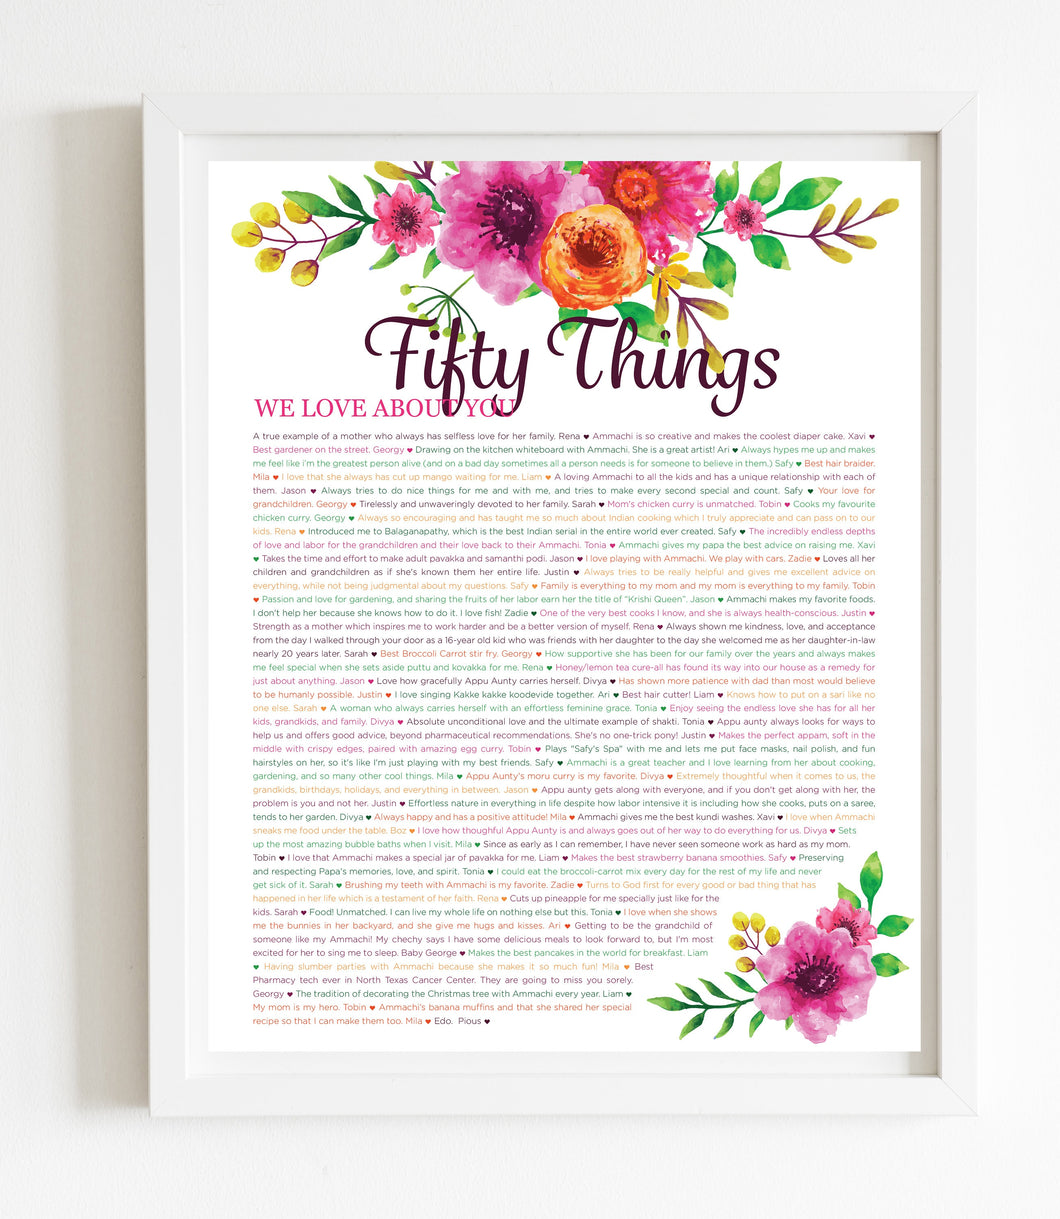 50 Things We Love About You Orange Floral DIGITAL Print; 50th Birthday; Wife's 50th Birthday; Friend's 50th Birthday; Mom's 50th